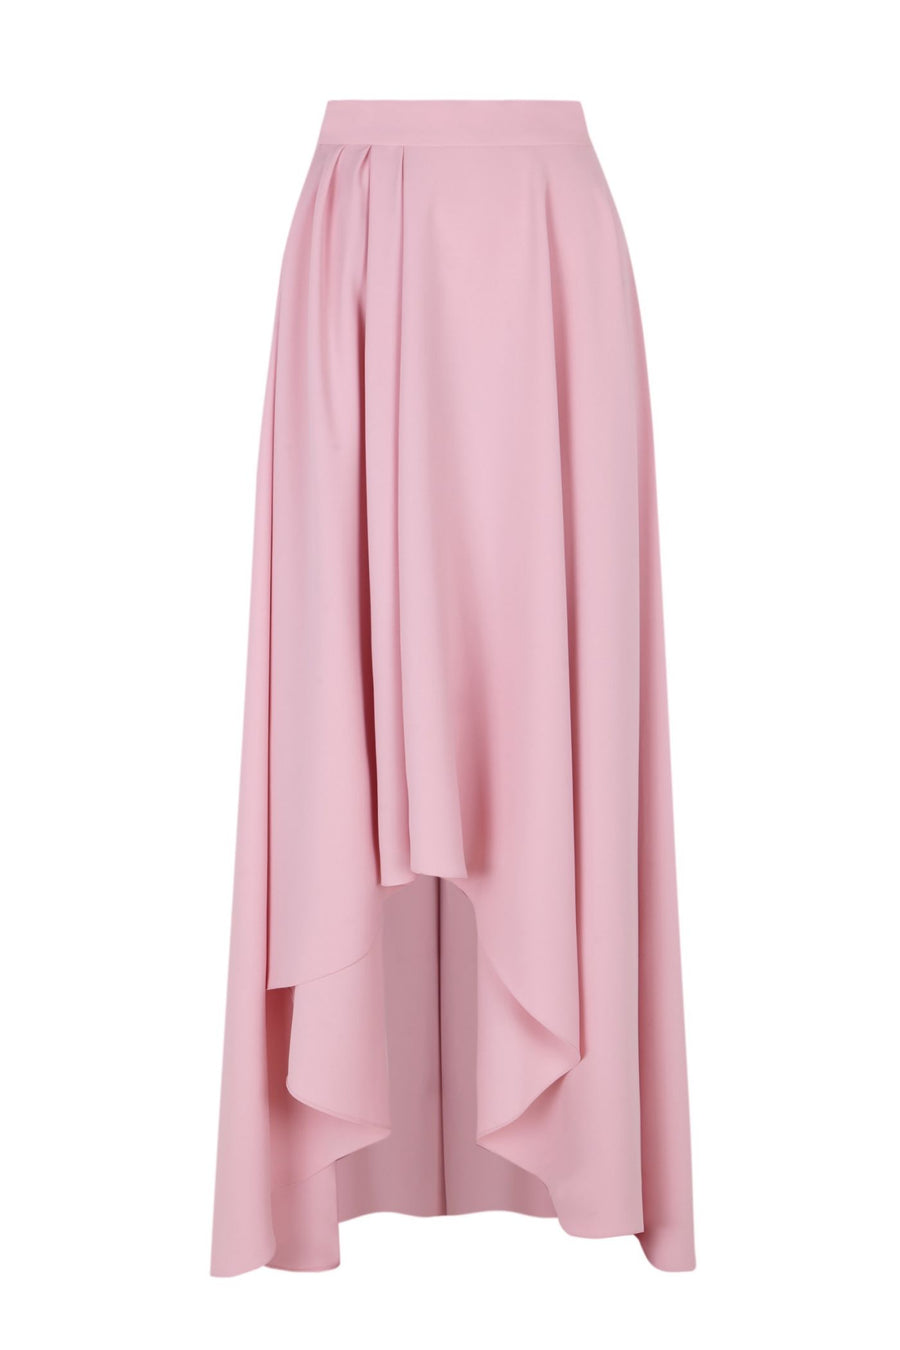 THE 2ND SKIN PINK CREPE SKIRT